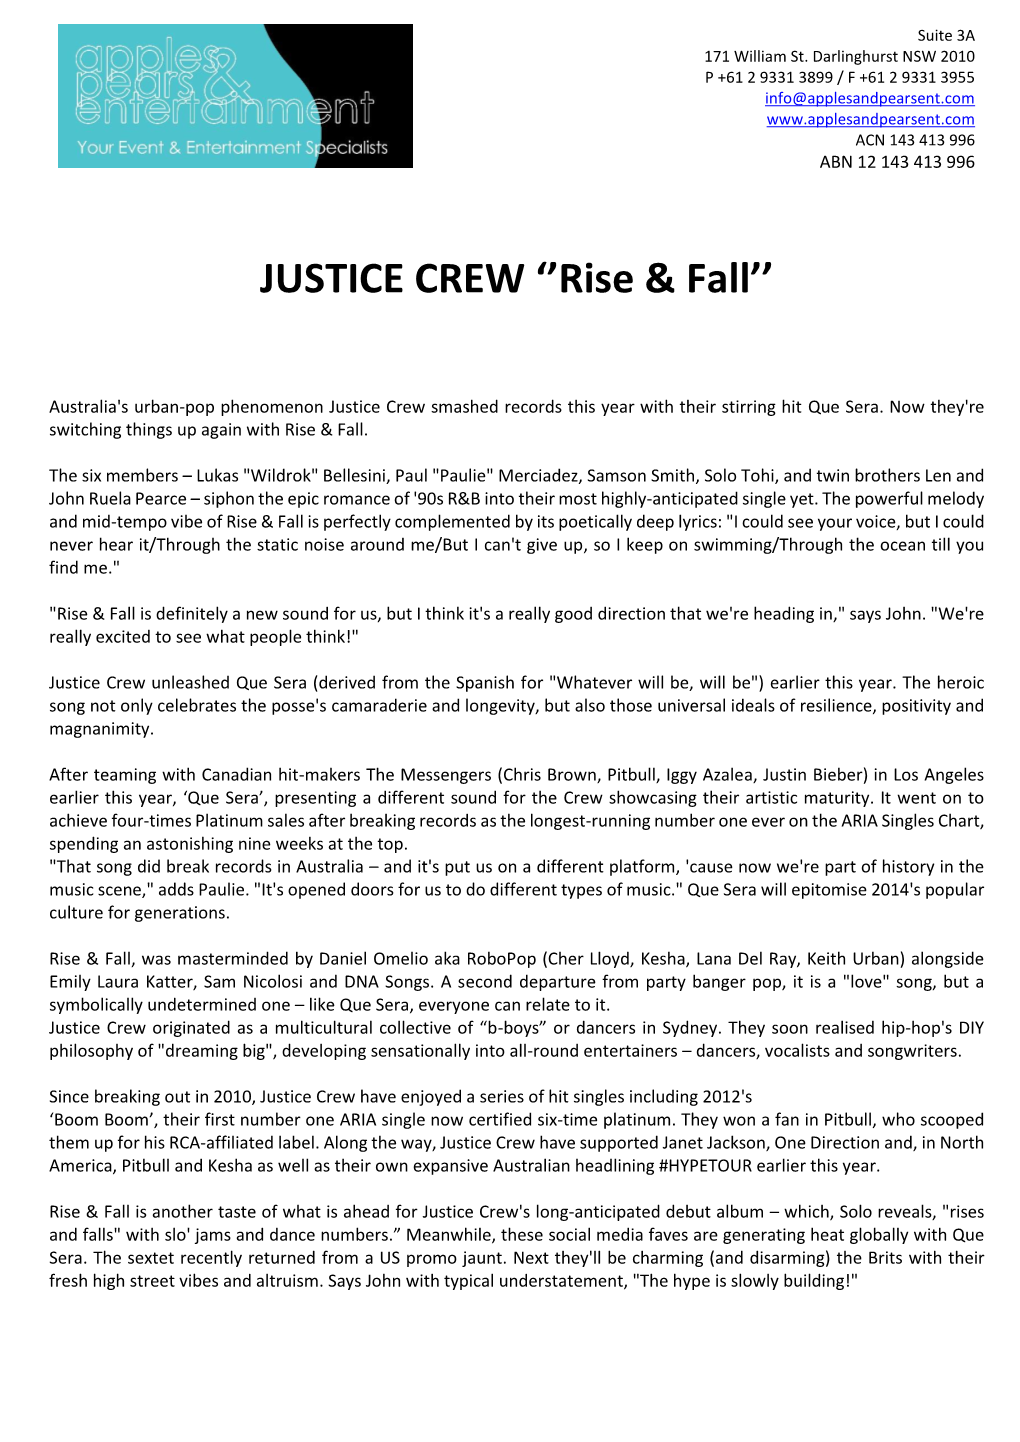 JUSTICE CREW ‘’Rise & Fall’’